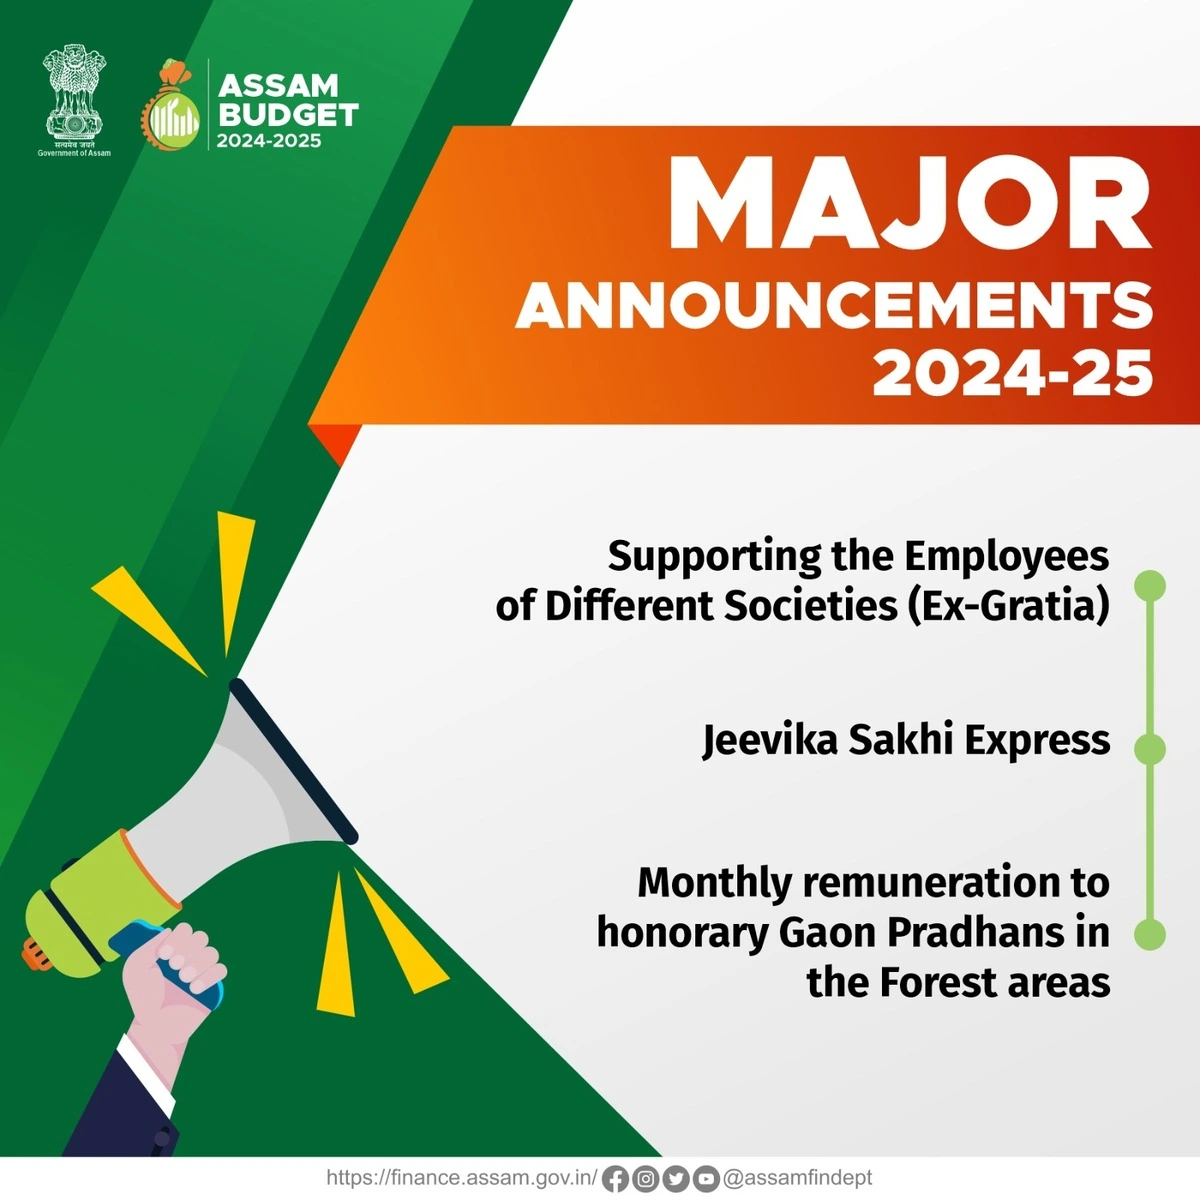 Assam Budget announced for the Financial Year 2024-25